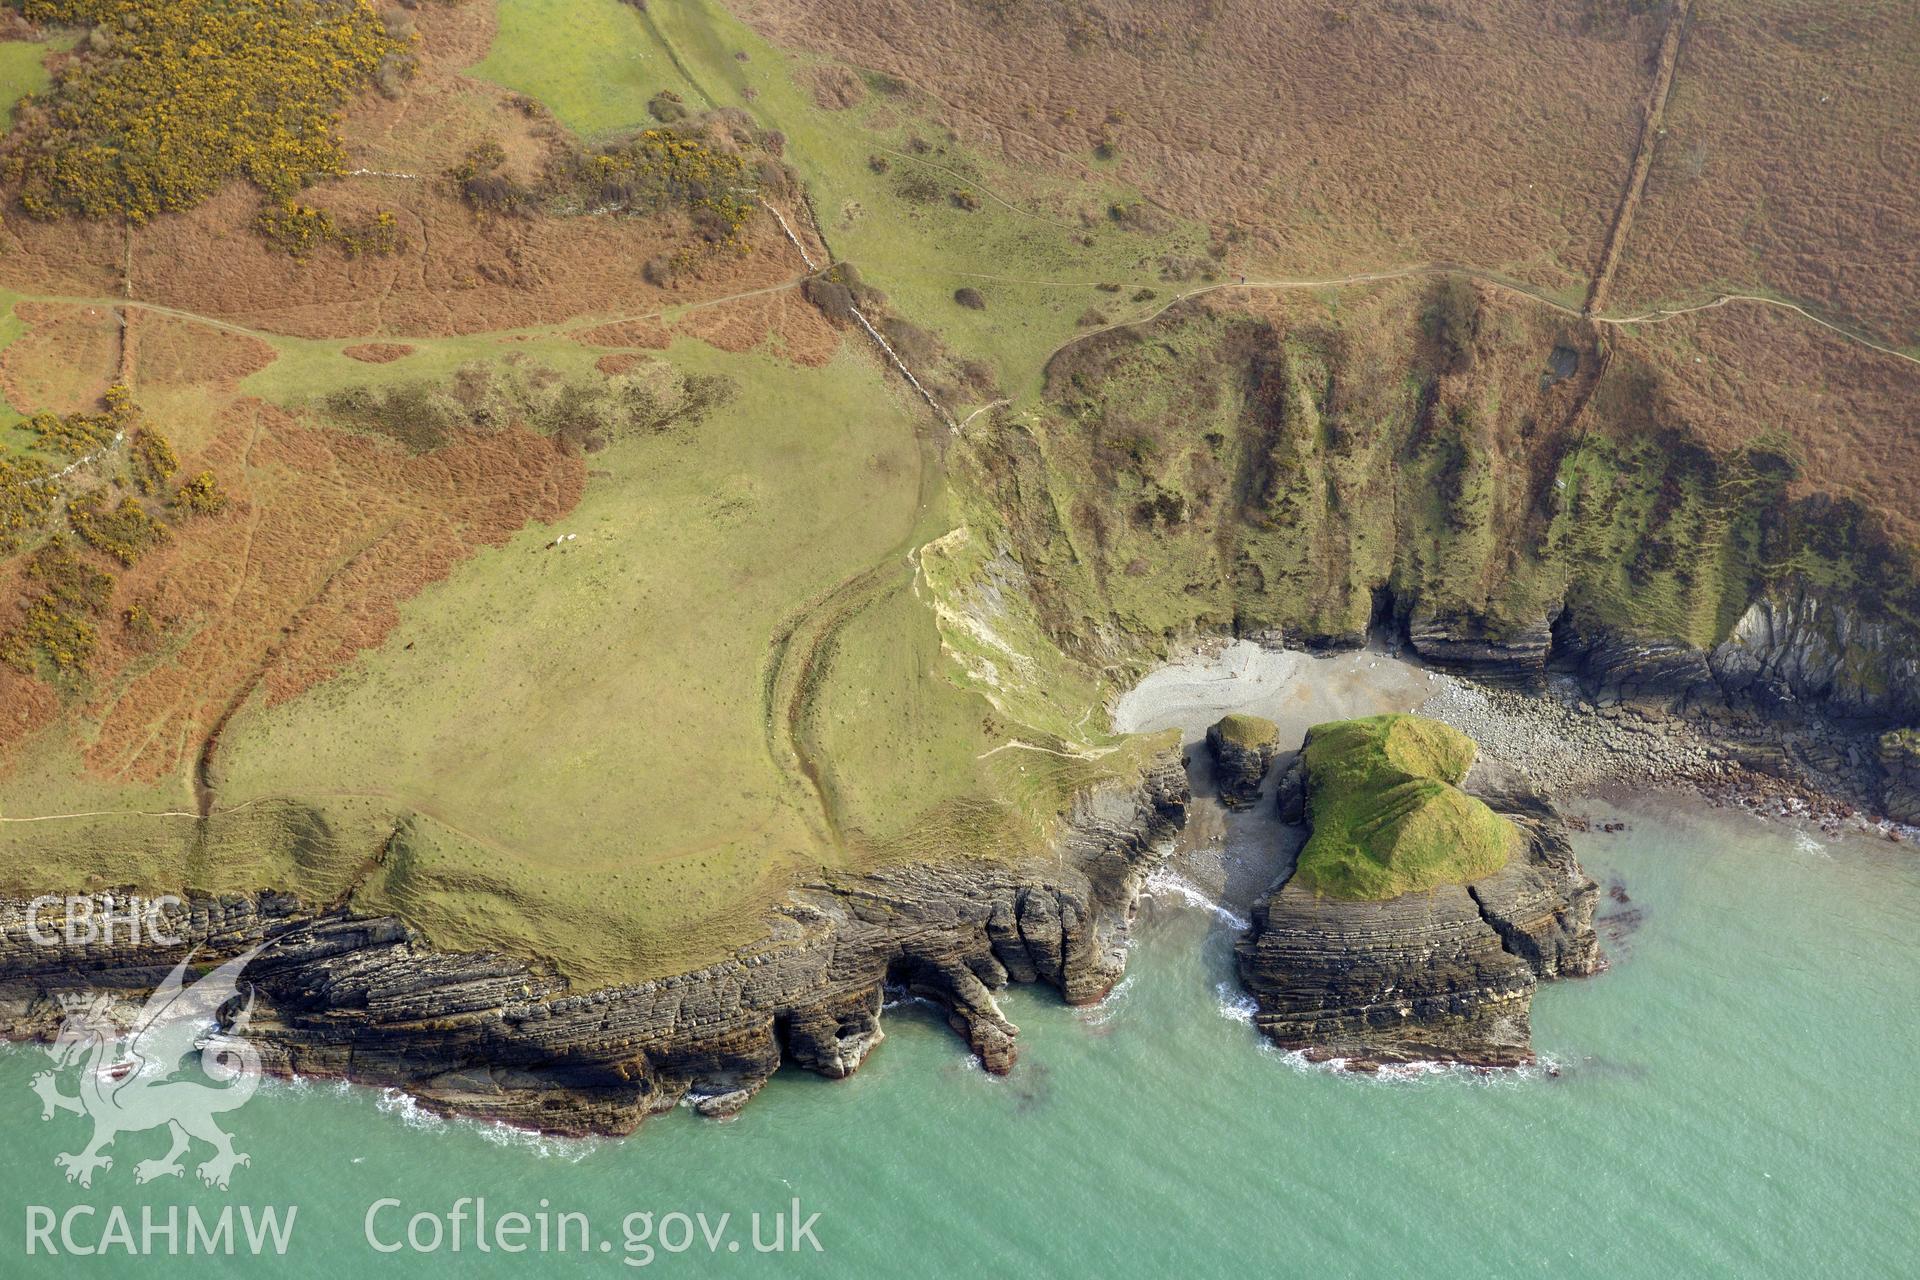 Aerial photography of Castell Bach taken on 27th March 2017 to monitor coastal erosion. Baseline aerial reconnaissance survey for the CHERISH Project. ? Crown: CHERISH PROJECT 2019. Produced with EU funds through the Ireland Wales Co-operation Programme 2014-2020. All material made freely available through the Open Government Licence.